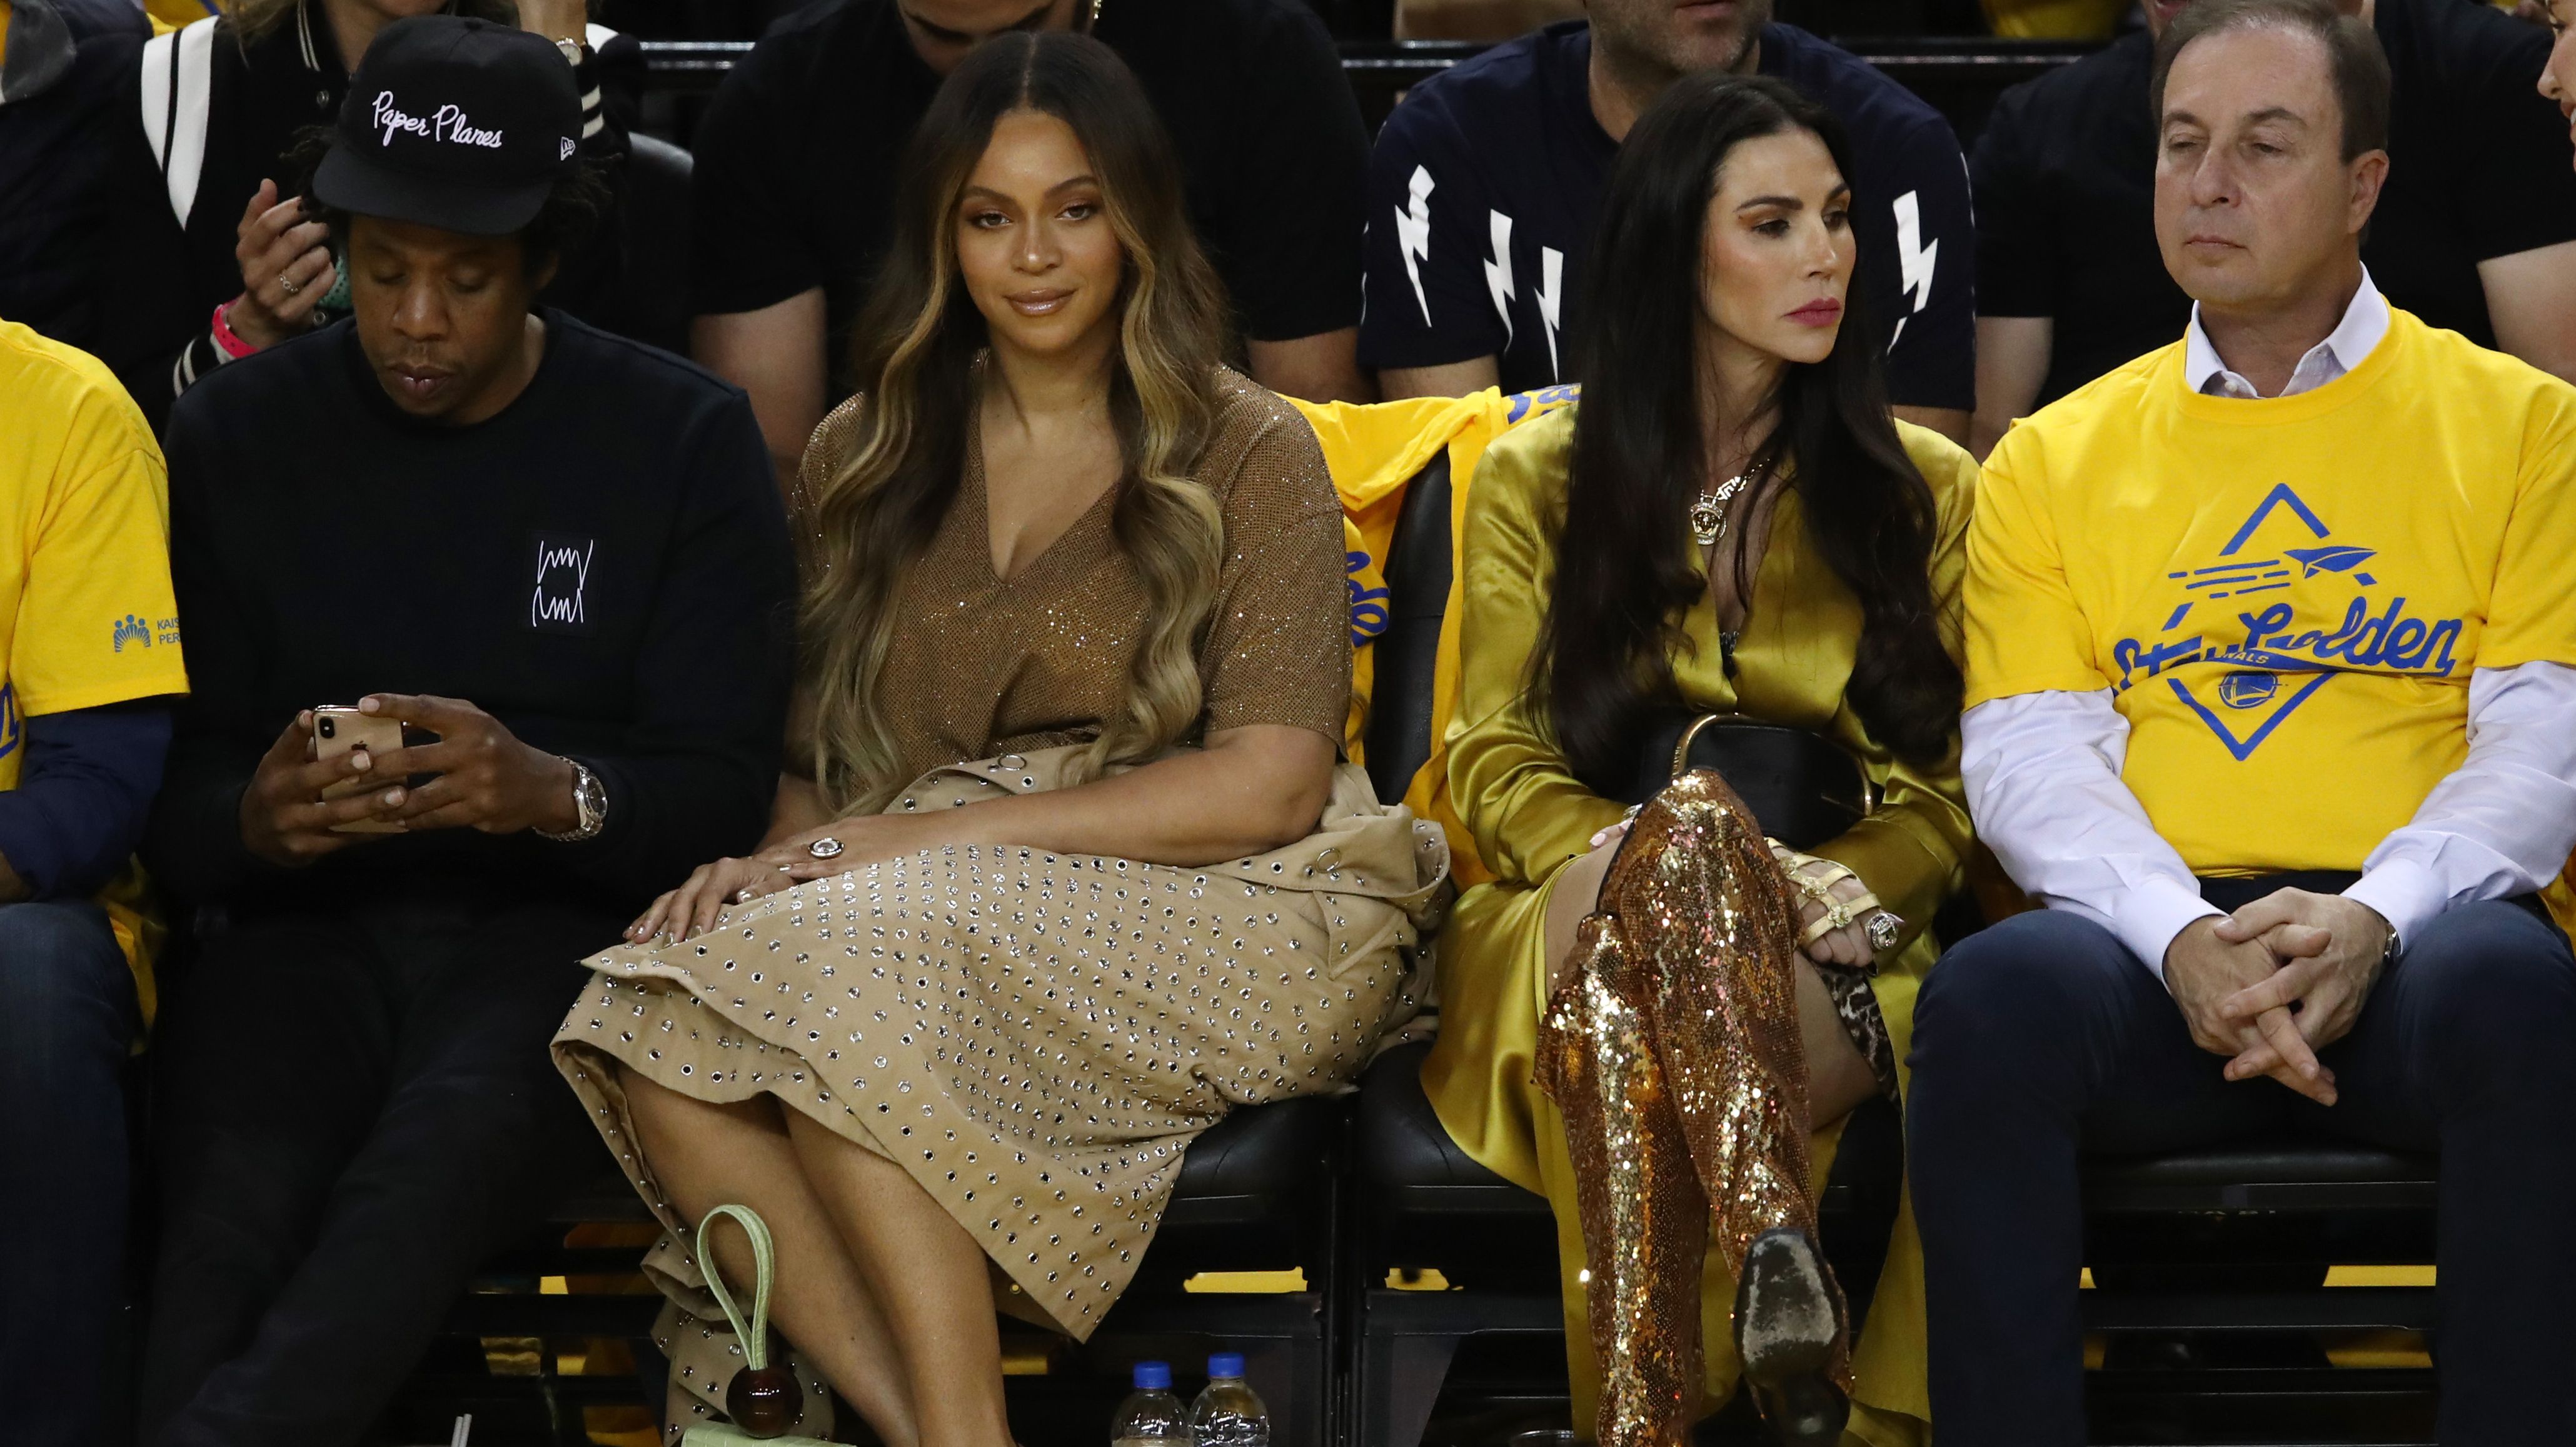 NBA owner's wife gets death threats from BeyoncÃ© fans